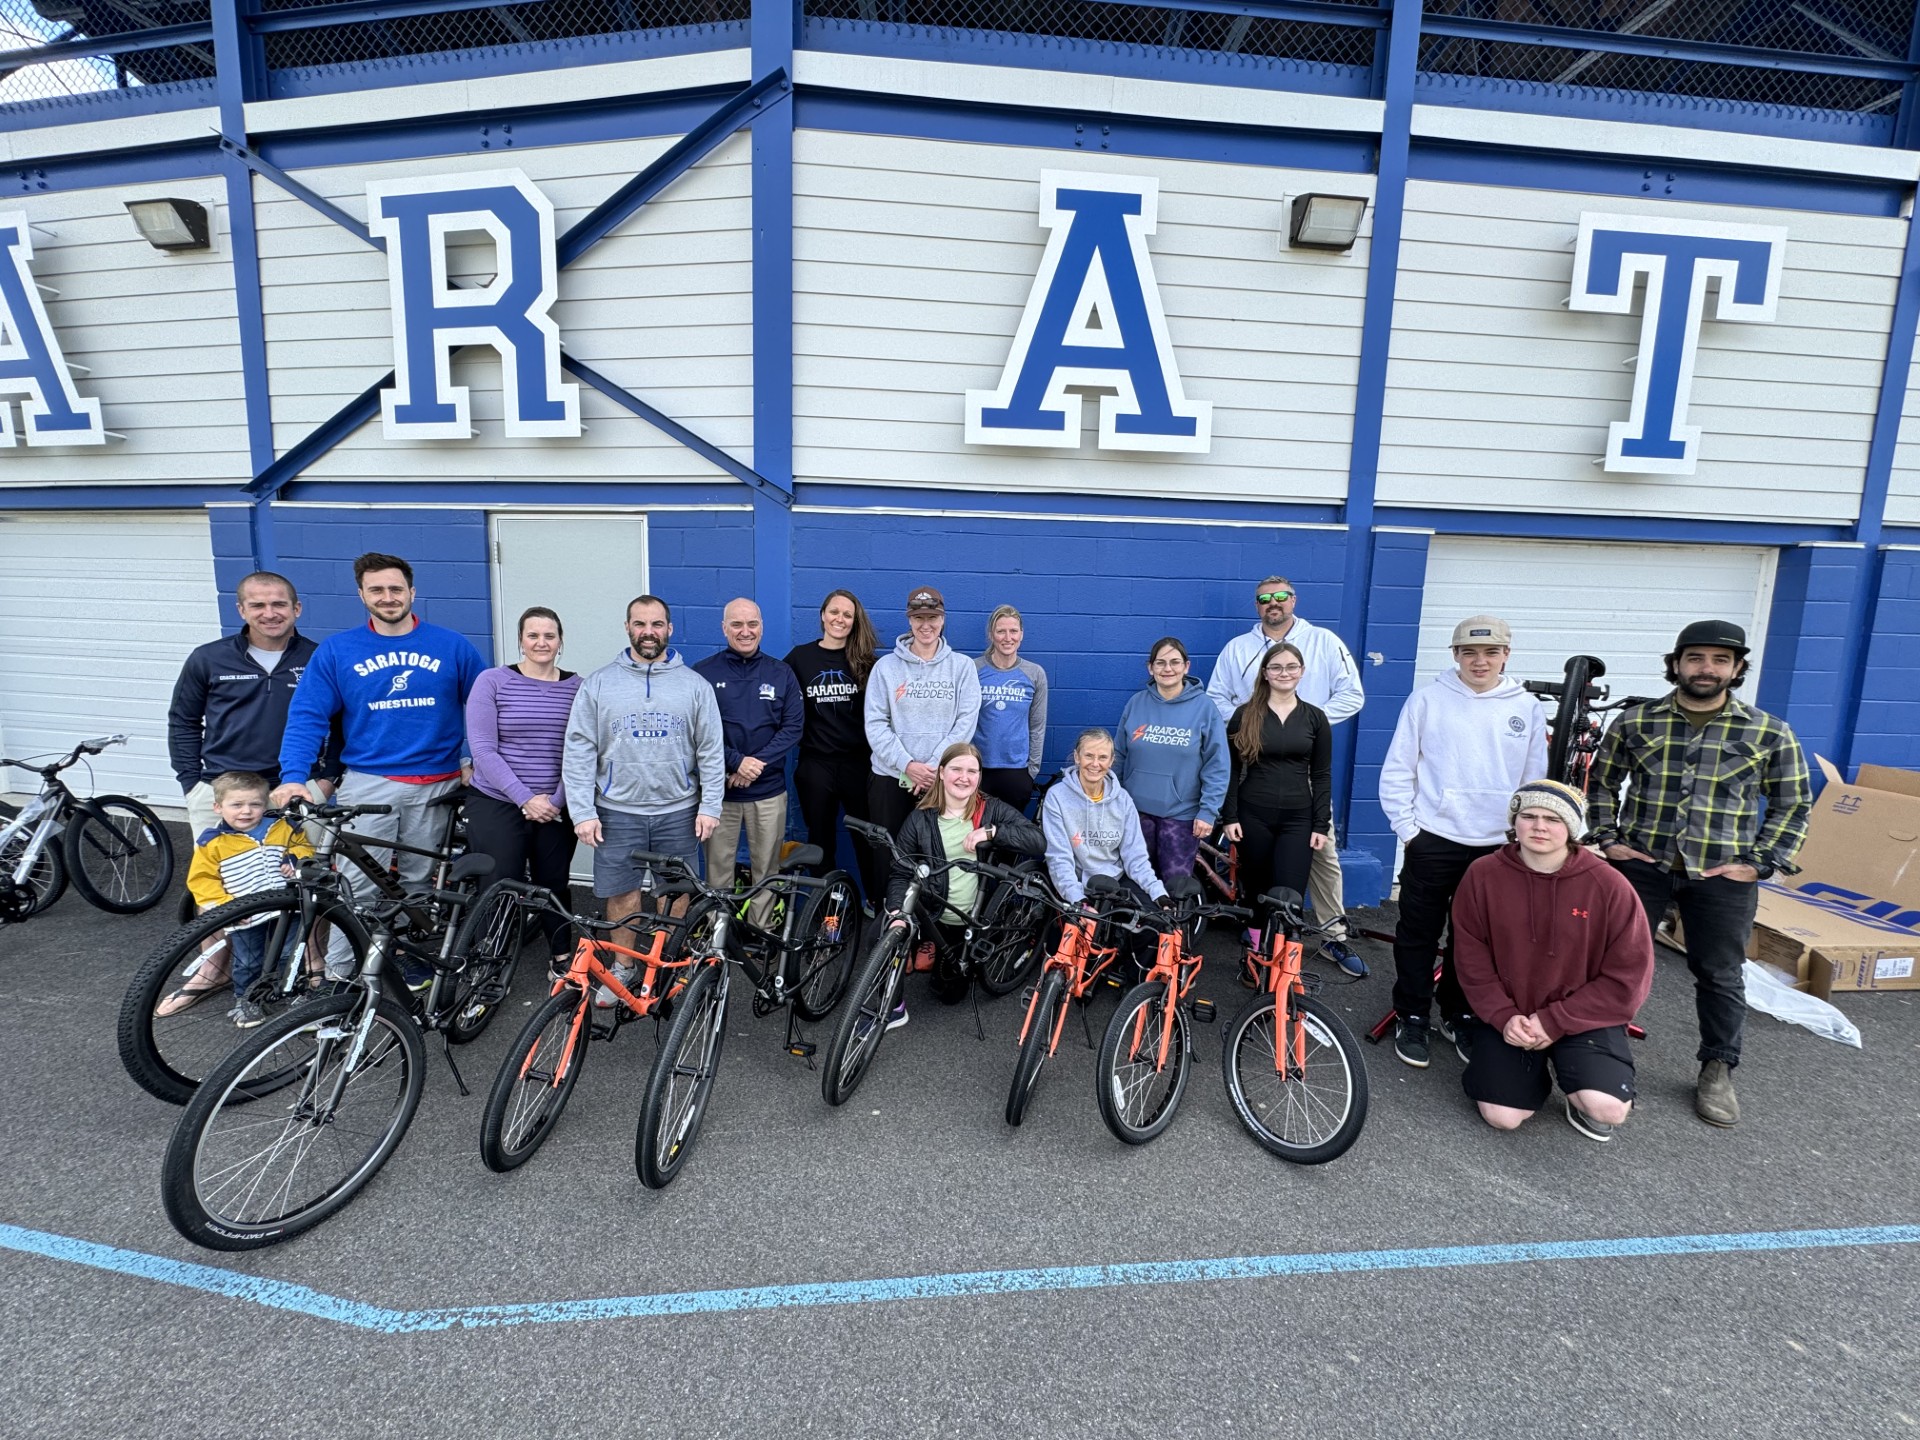 Image for Saratoga Shredders, with Support from Saratoga County Supervisors, Launches Innovative Bikes in Schools Program for Local Elementary Students